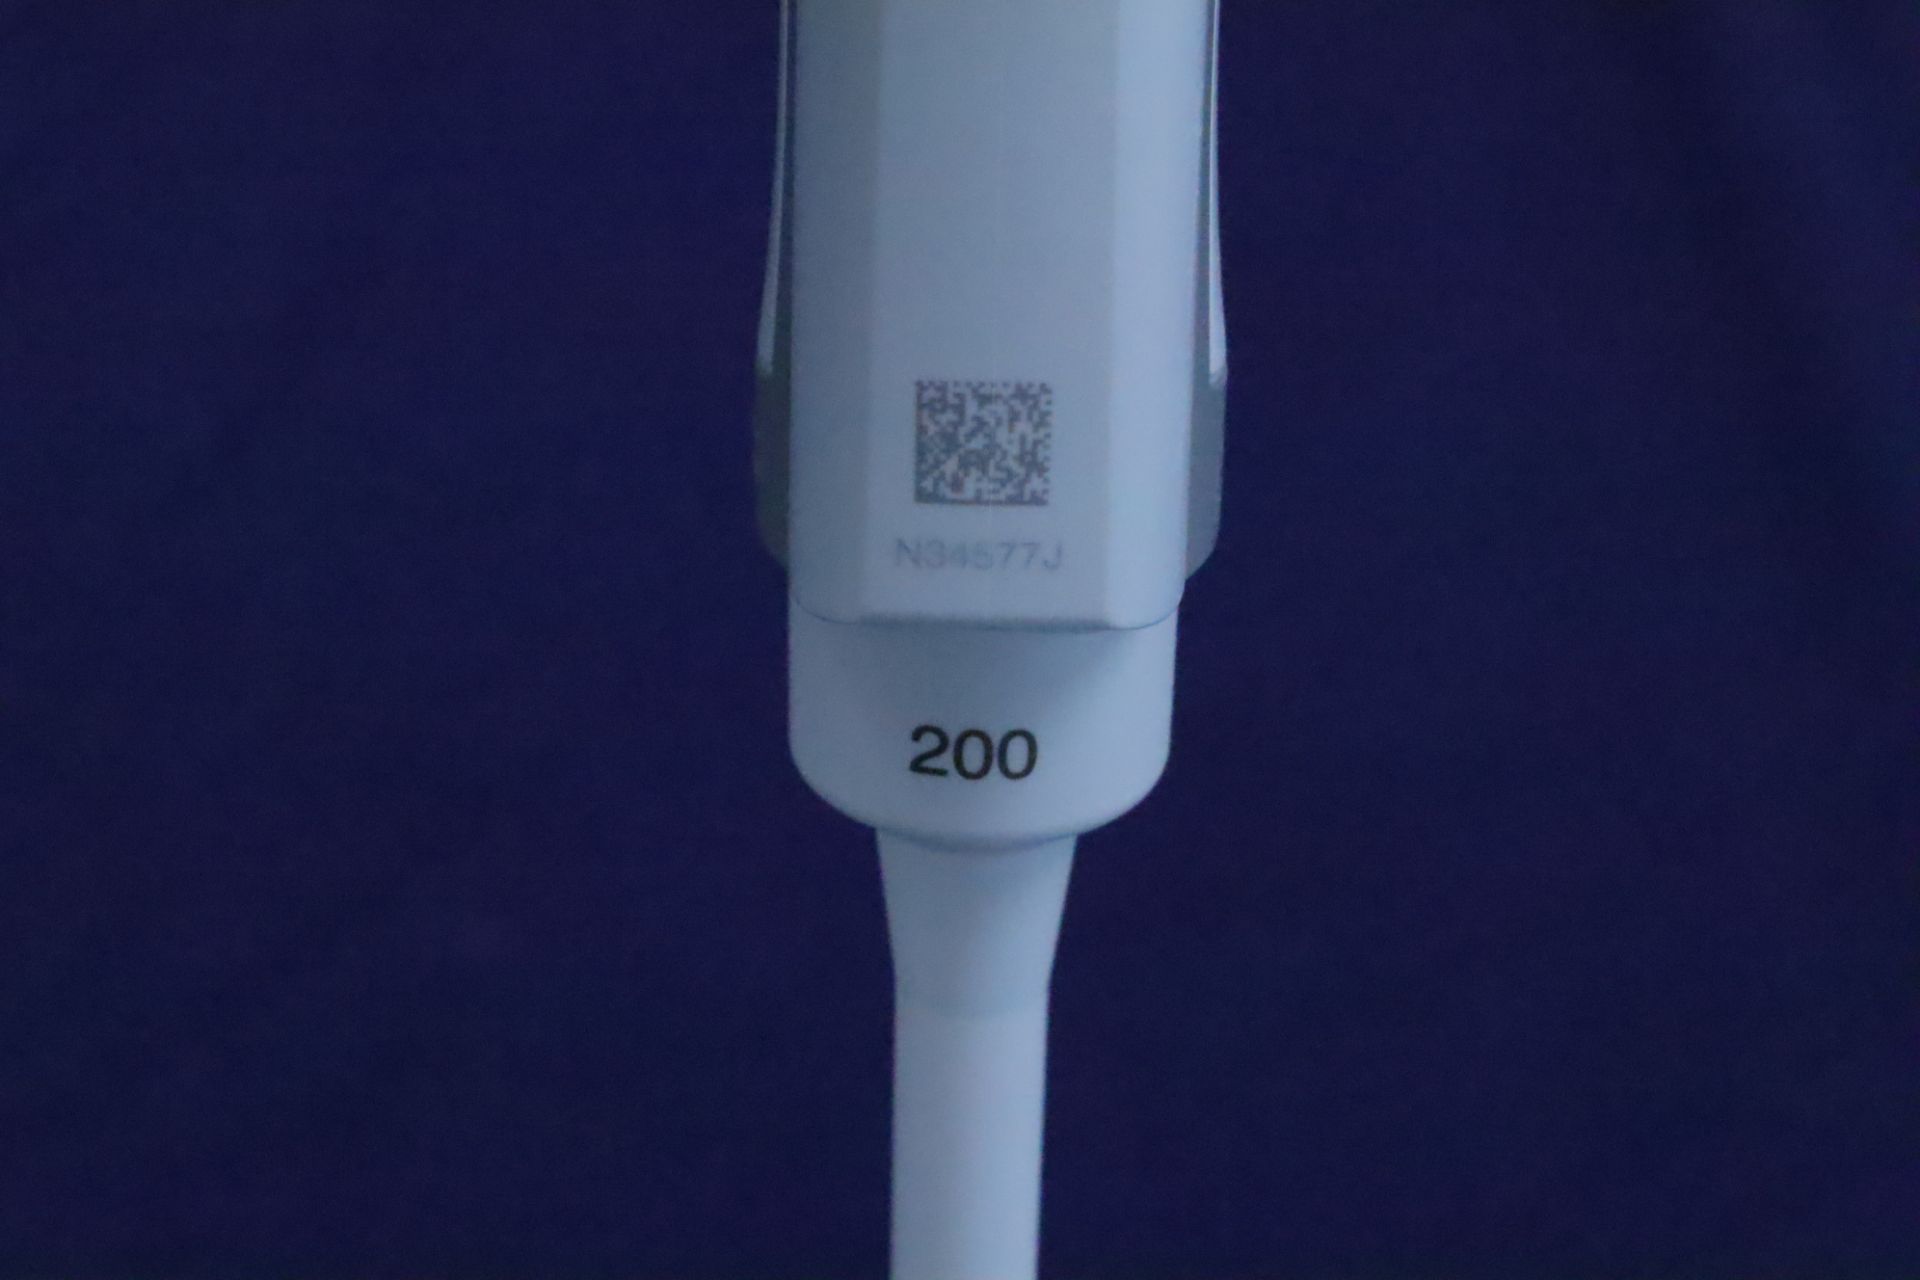 Eppendorf Research Plus Adjustable Volume Pipette 20-200 uL - Image 4 of 4